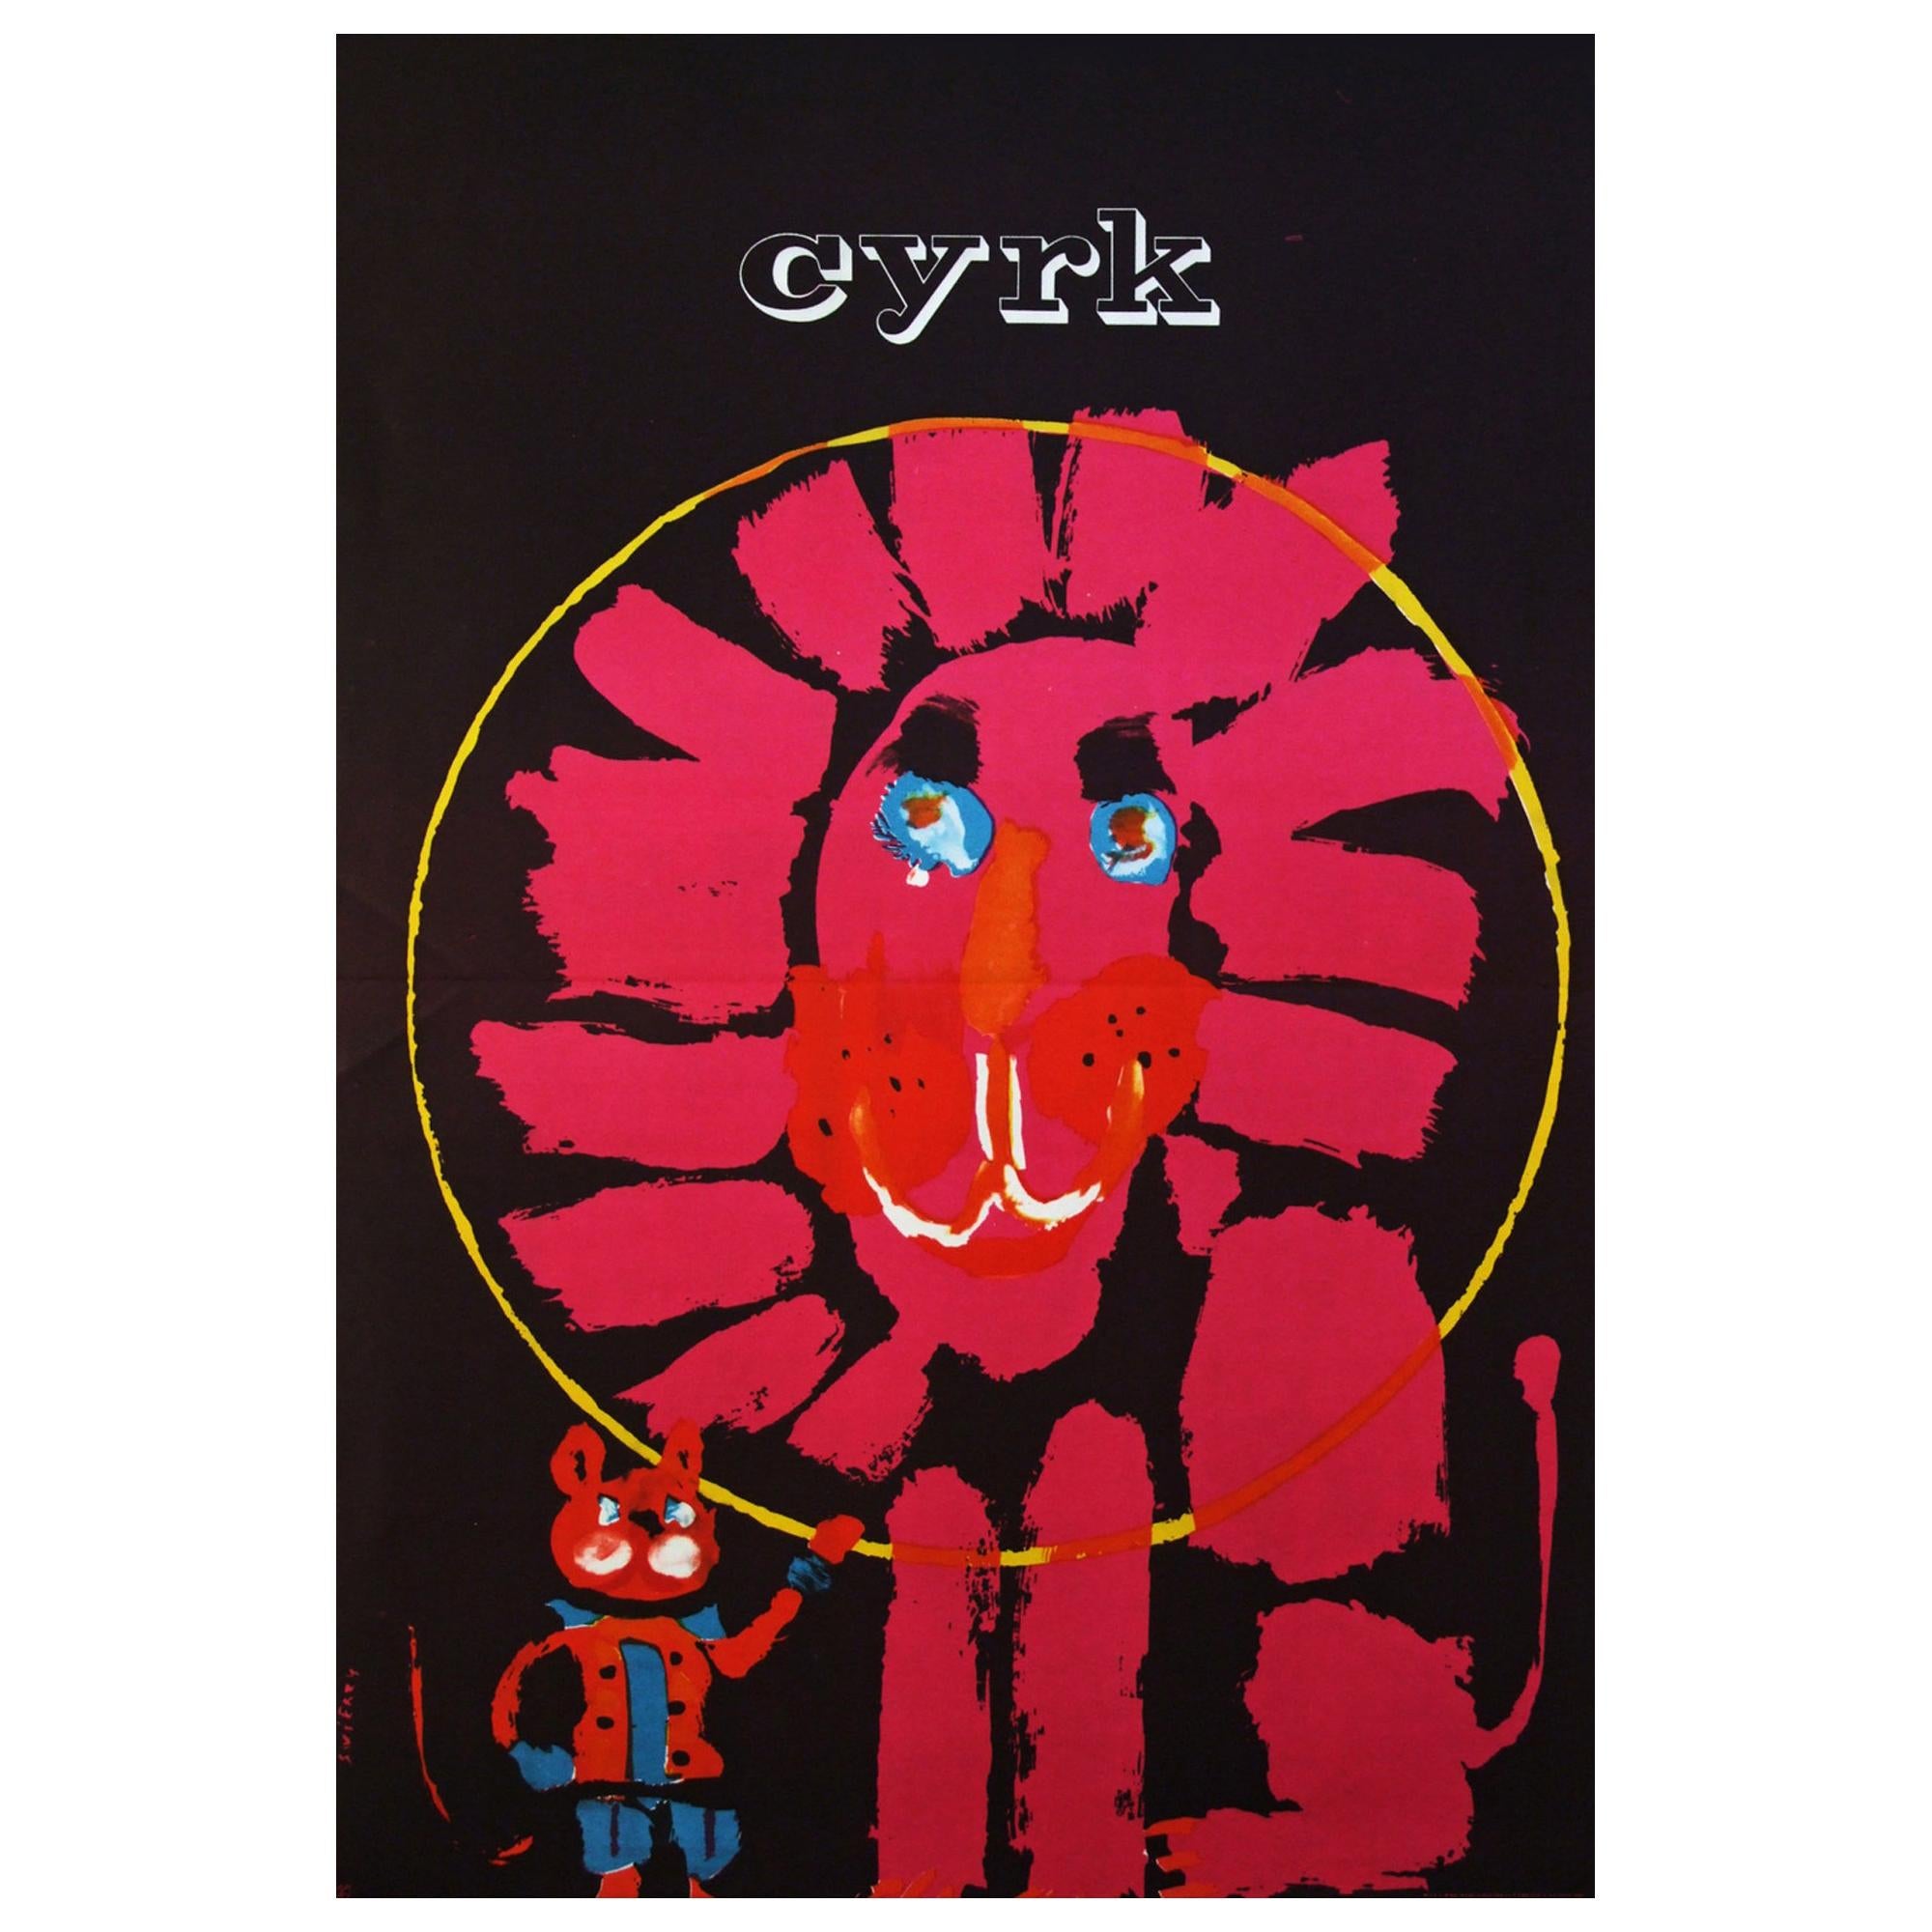 Original 1963 Polish circus promotional poster designed by Waldemar Swierzy.

First edition color offset lithograph.

Folded as originally issued.

Measures: L 87.5cm x W 67cm.